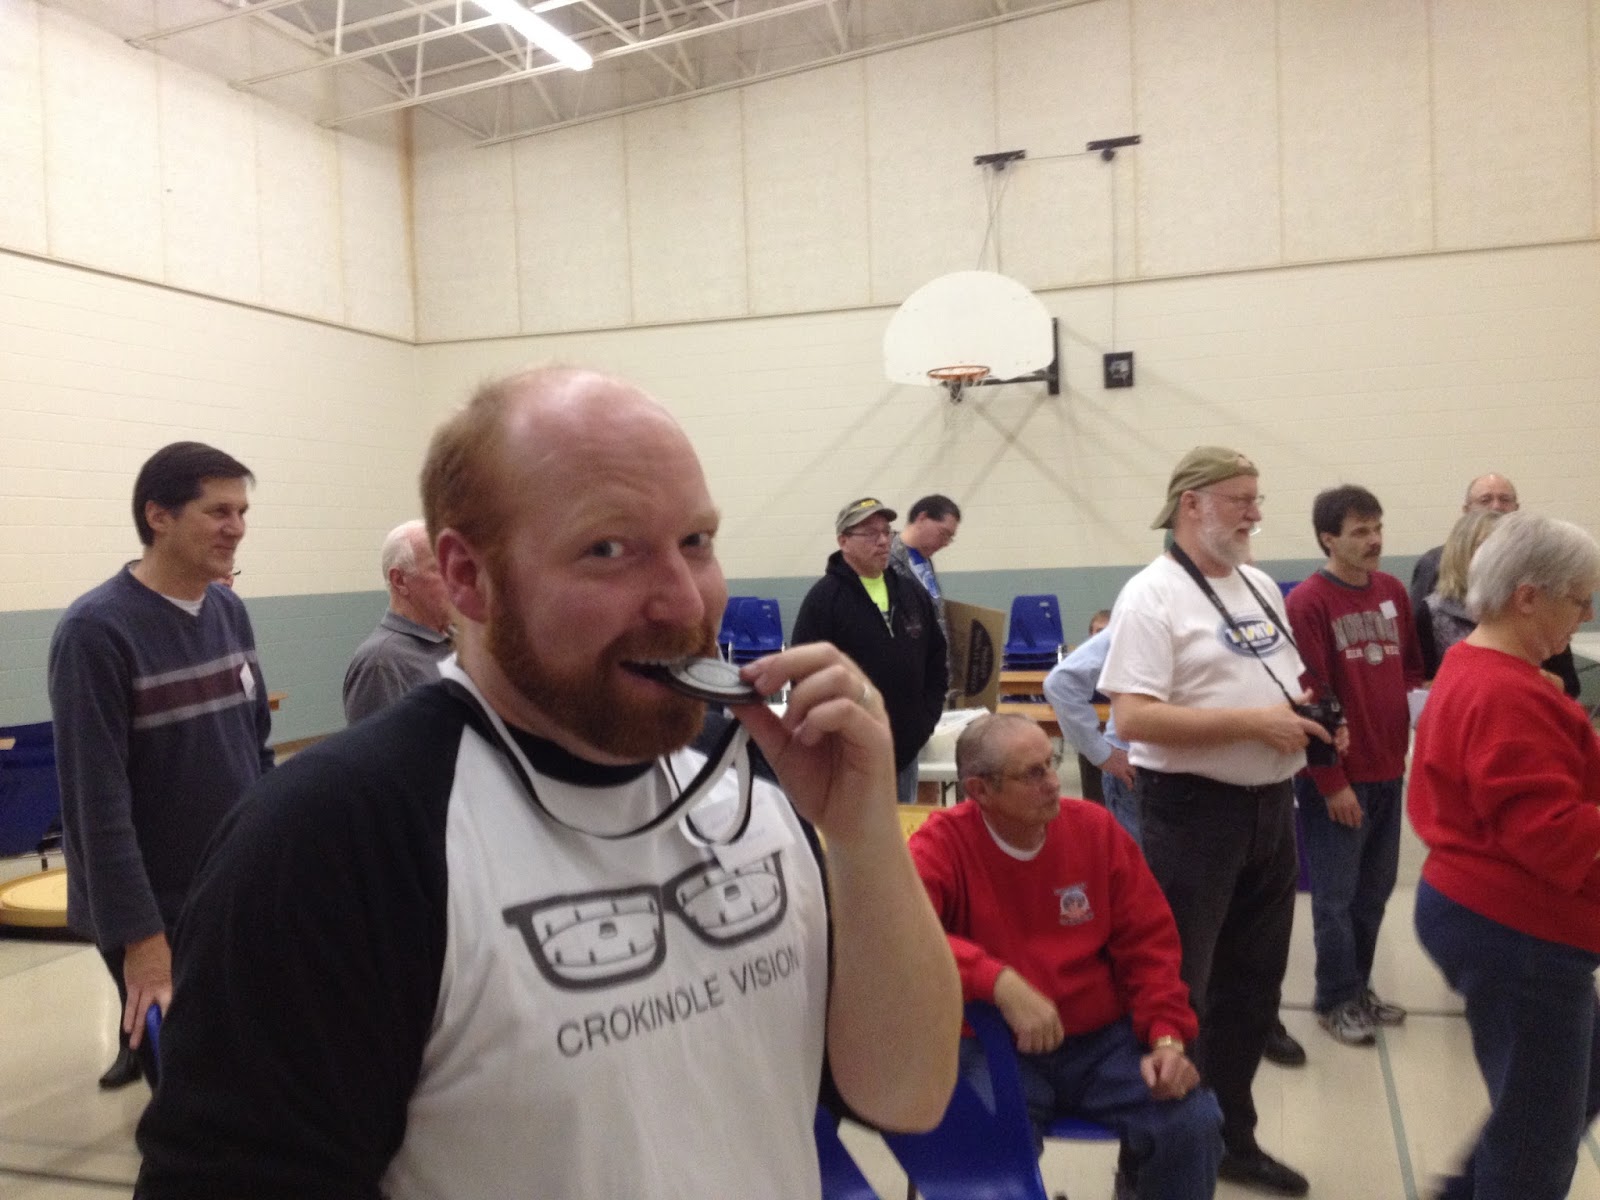 Jason Beierling enjoying a tasty bite out of his silver medal.